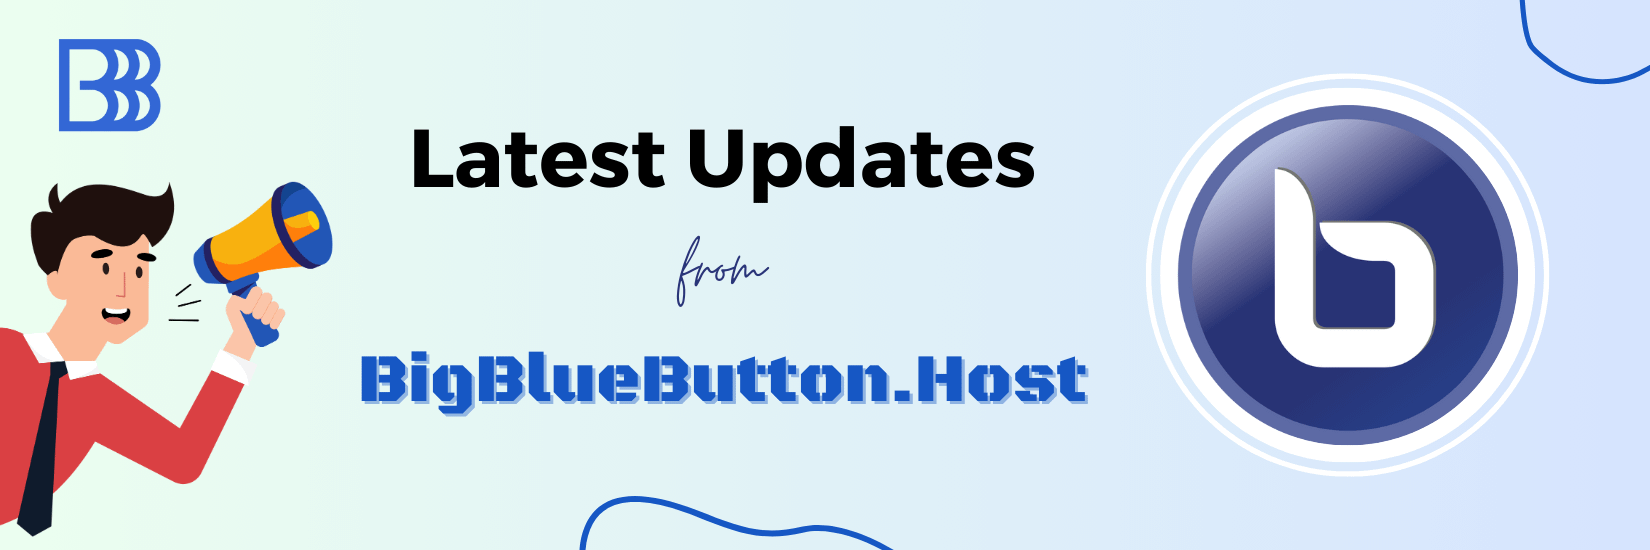 Latest Updates from BigBlueButton Host